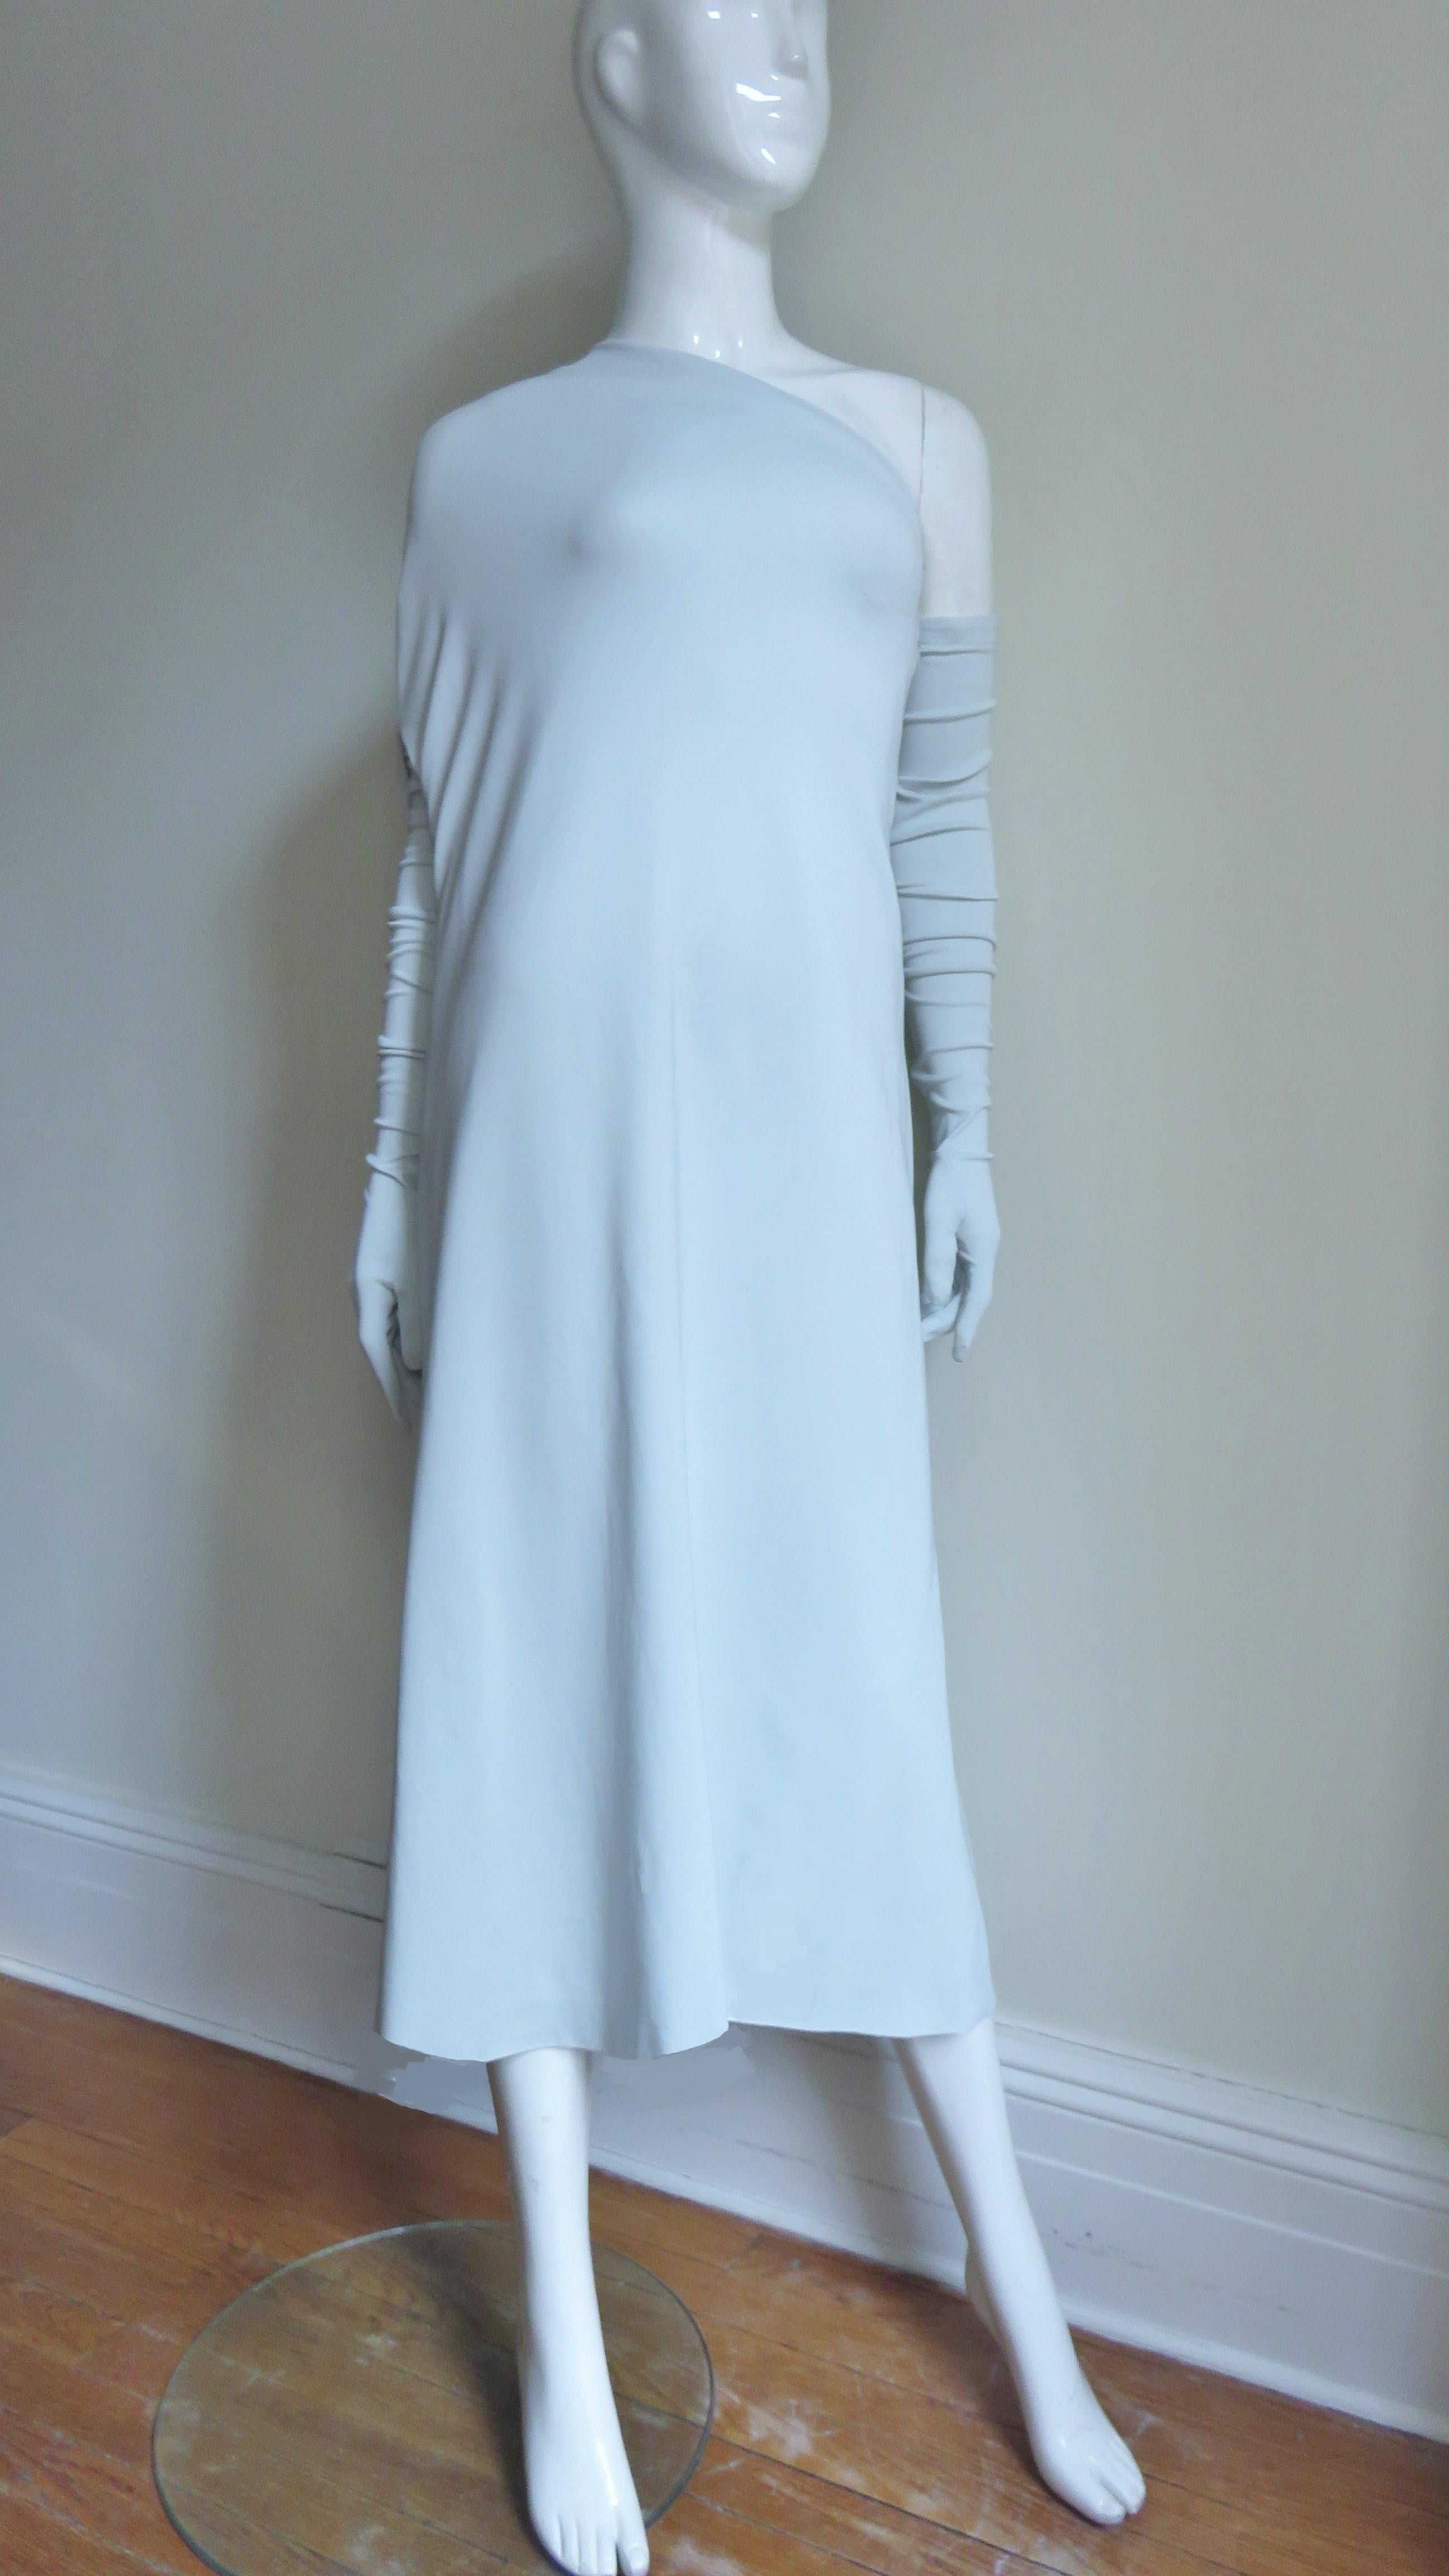 A fabulous dramatic pale mint one shoulder jersey dress from Martin Margiela with matching long gloves.  The dress drapes over one shoulder and has an adjustable zippered opening for the arm to go through which includes a pocket.  The other side